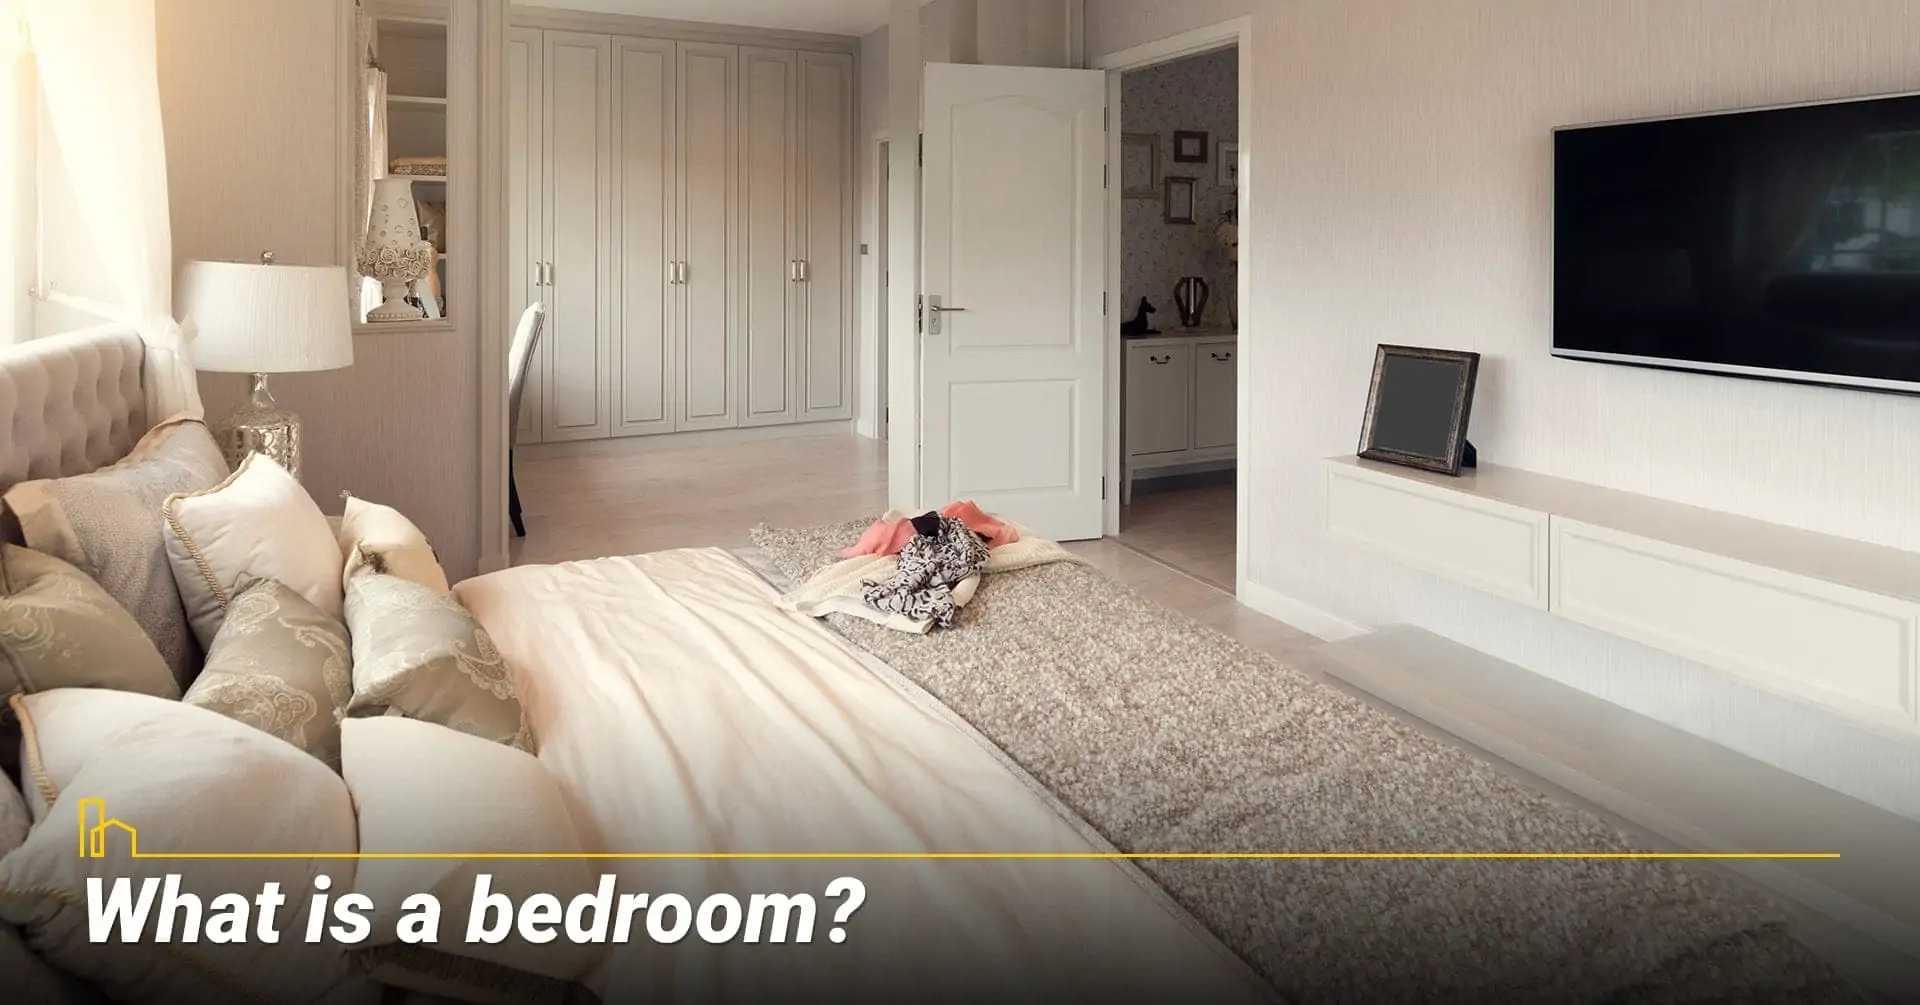 What is a bedroom? define a bedroom